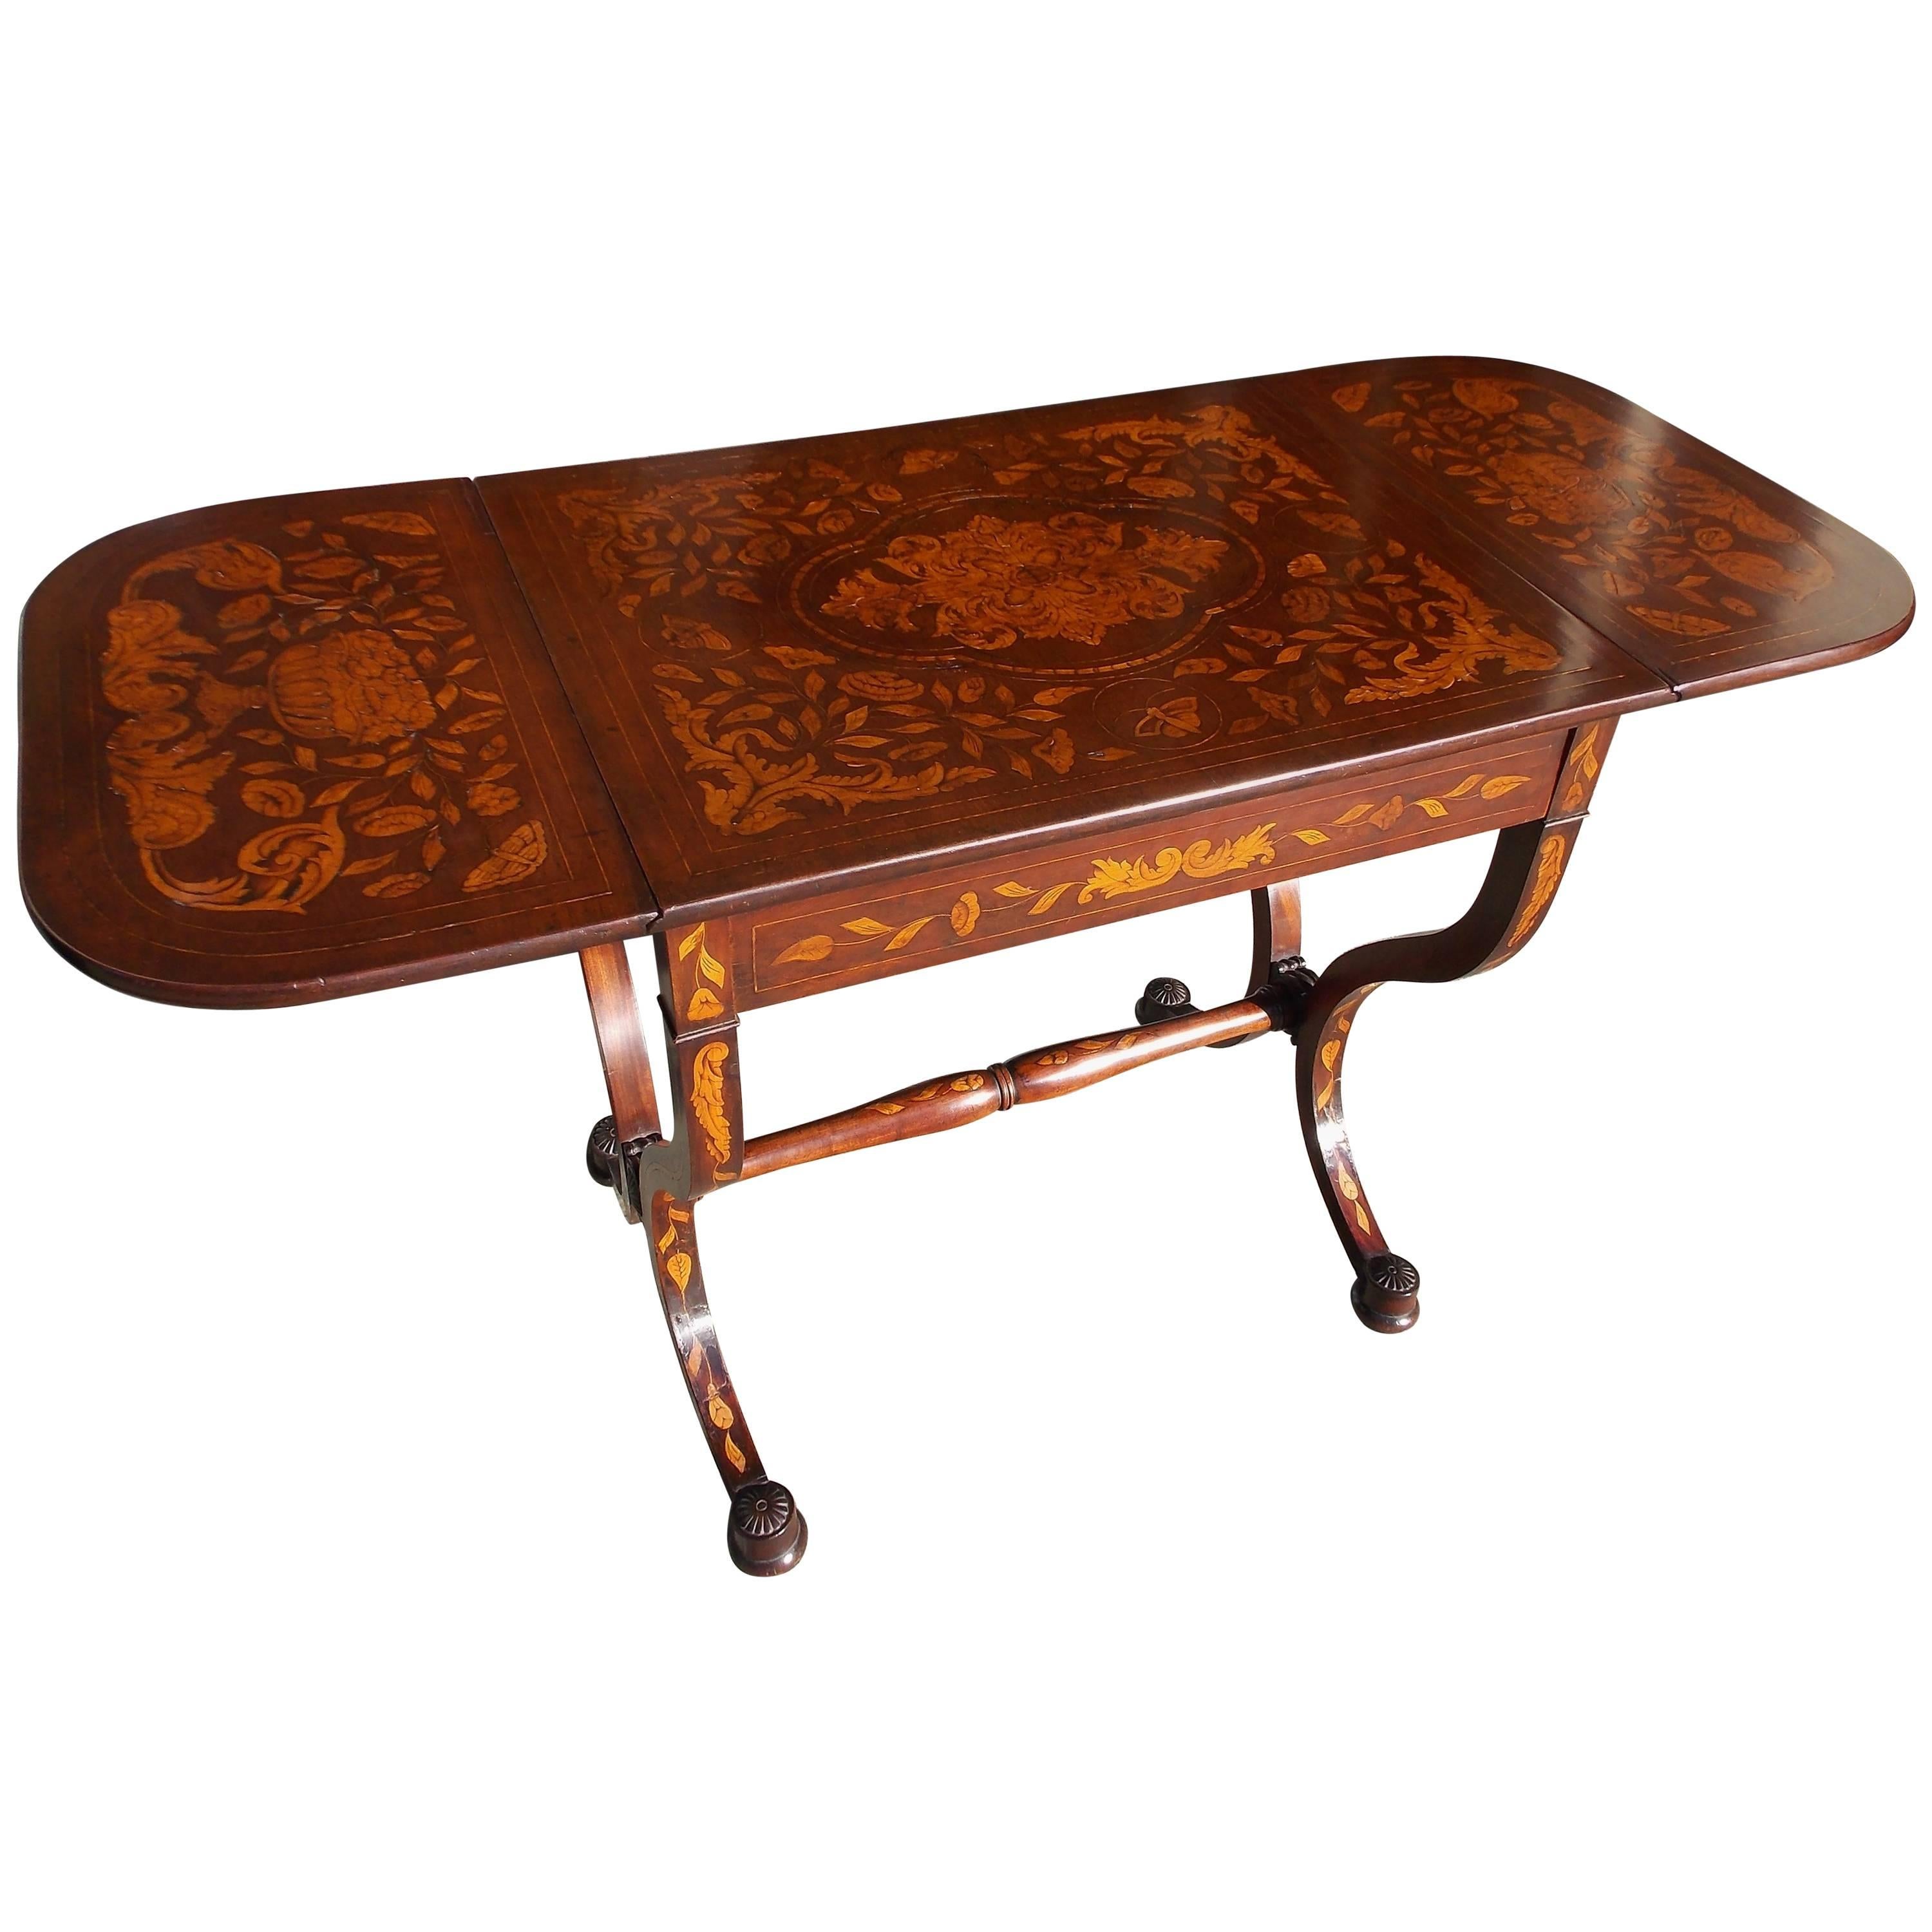 Dutch Regency Kingwood Marquetry Inlaid One Drawer Library Table, Circa 1815 For Sale